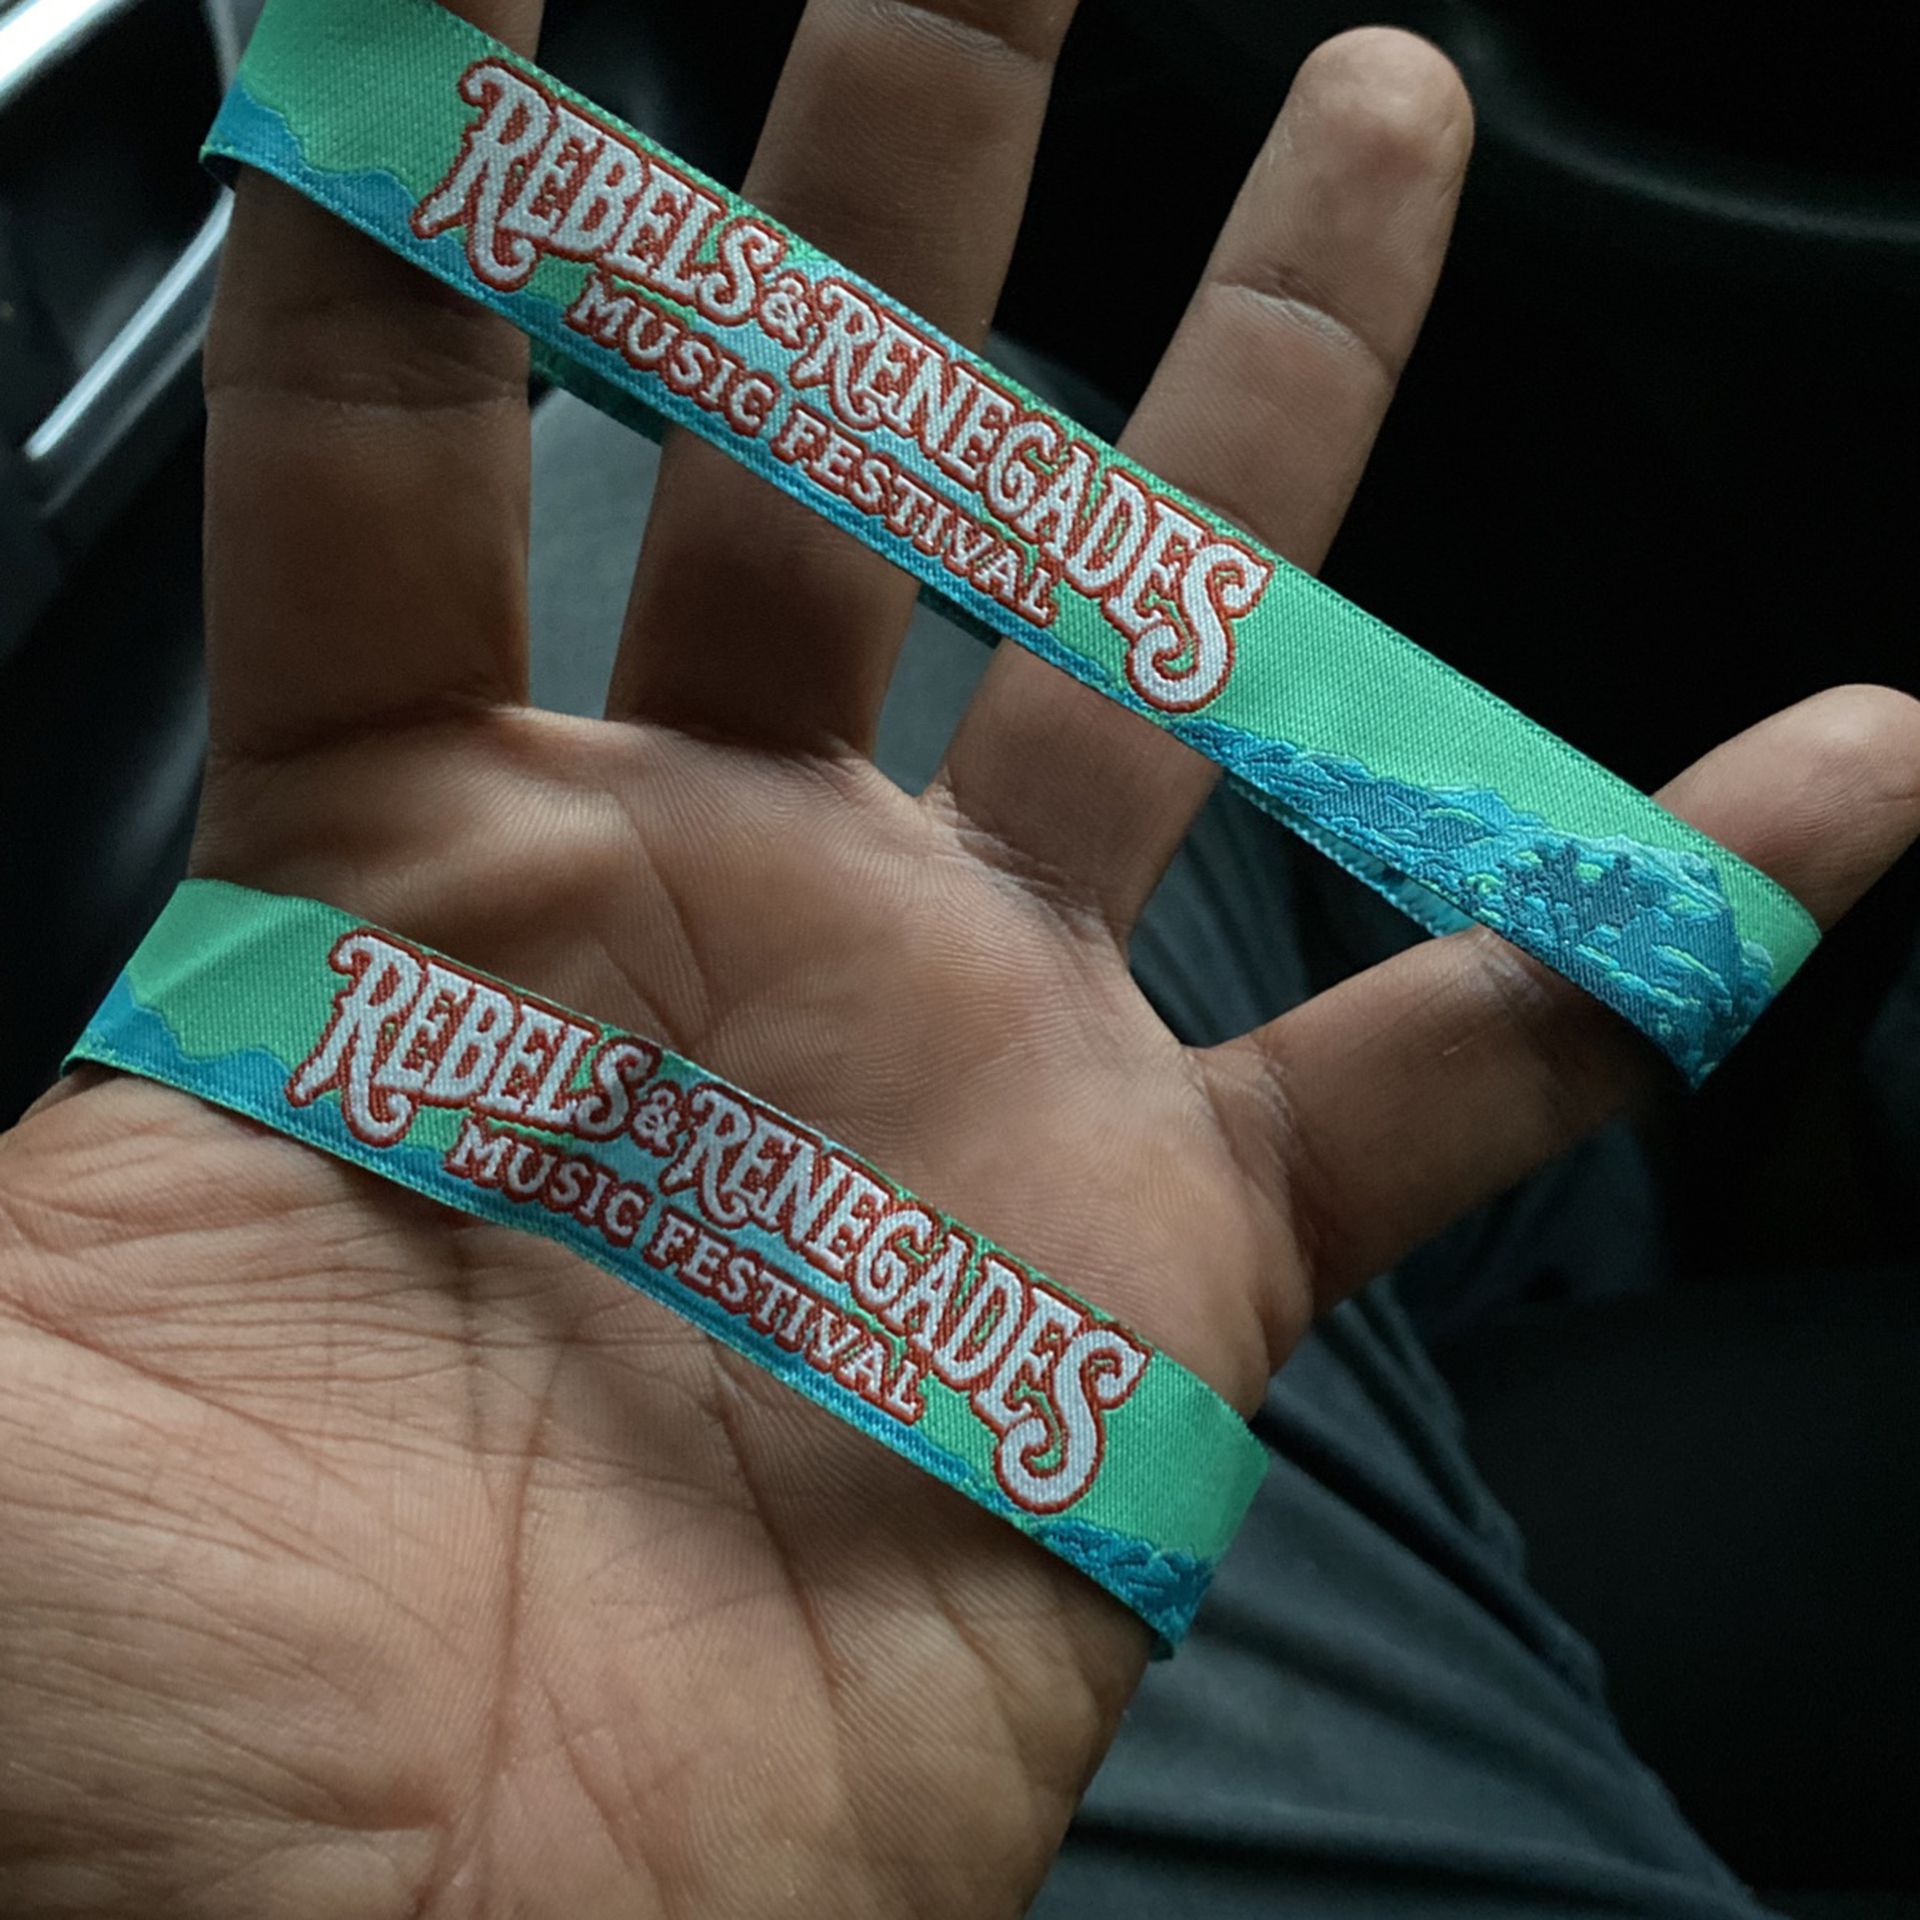 2 VIP Bands For Saturday Boots And Renegade 